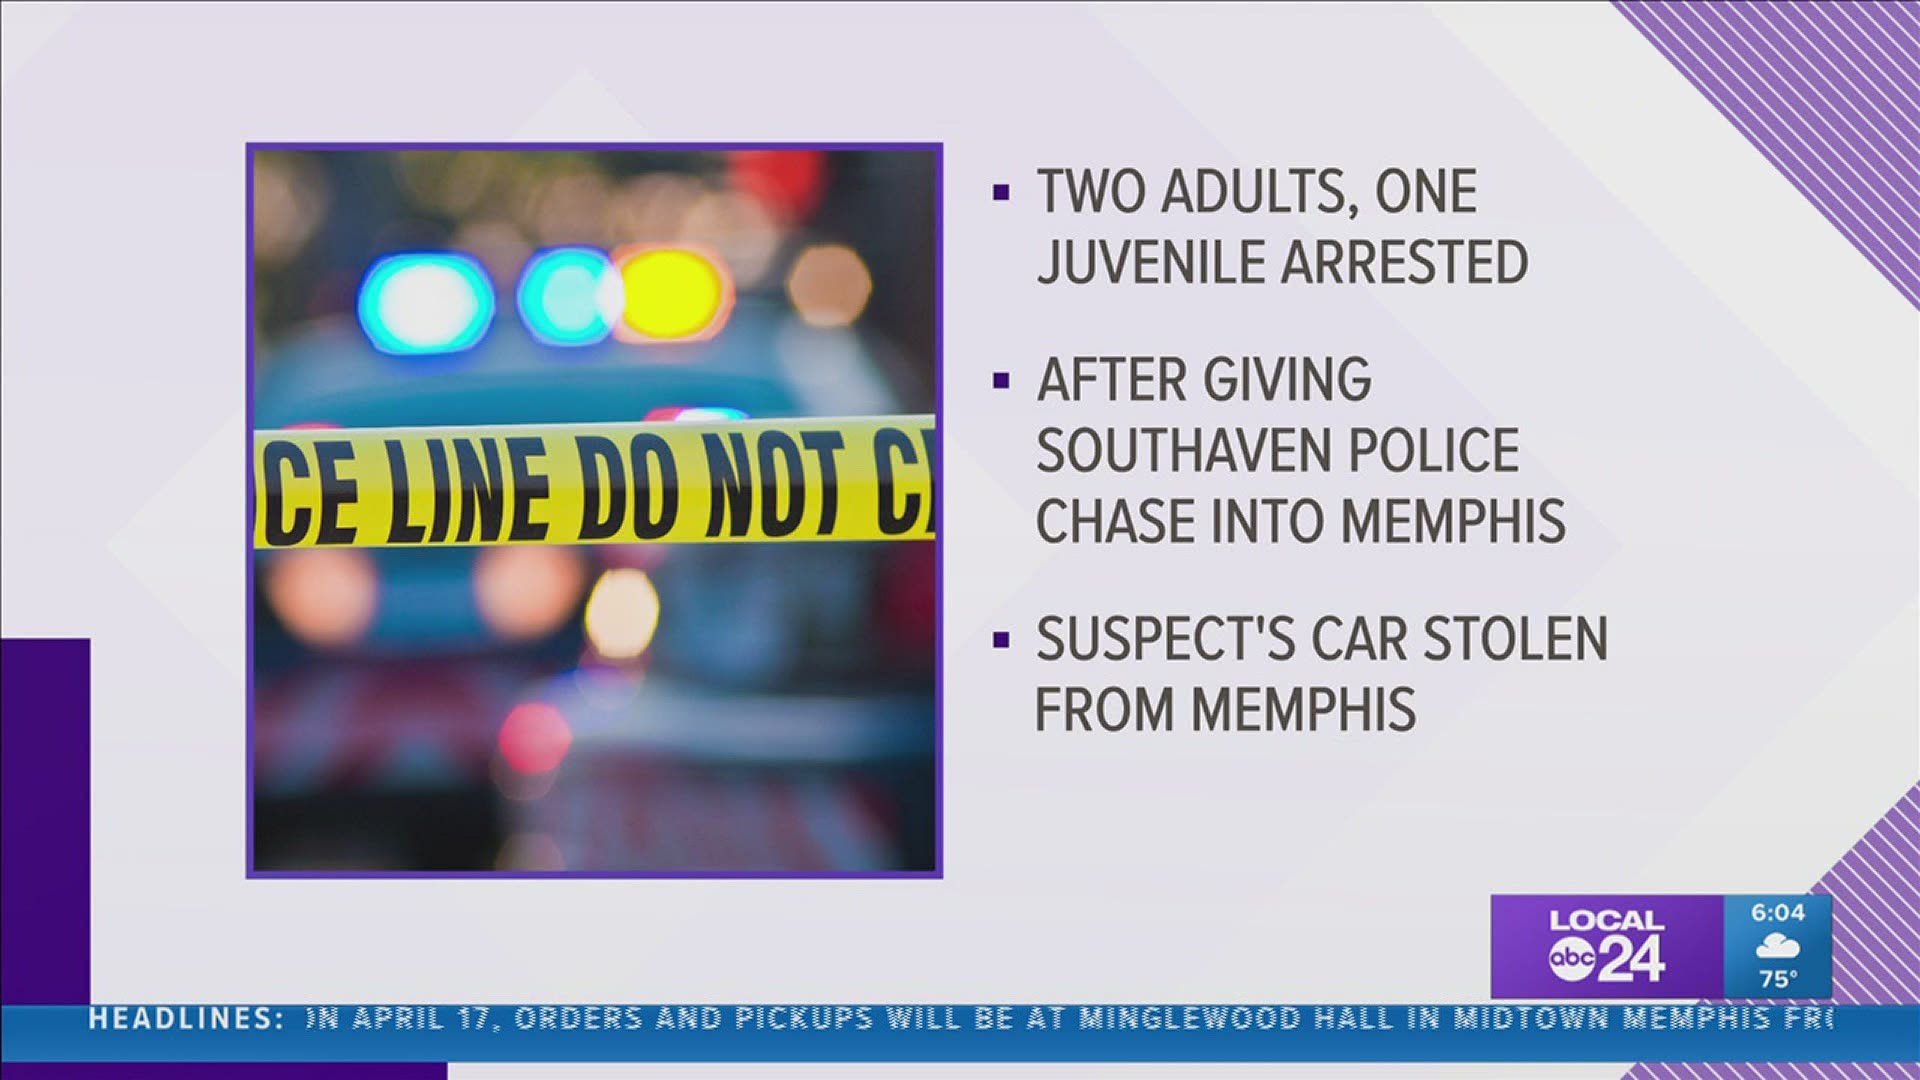 Southaven Police said three people were arrested – two adults and one juvenile – after an overnight police chase from Southaven into Memphis.